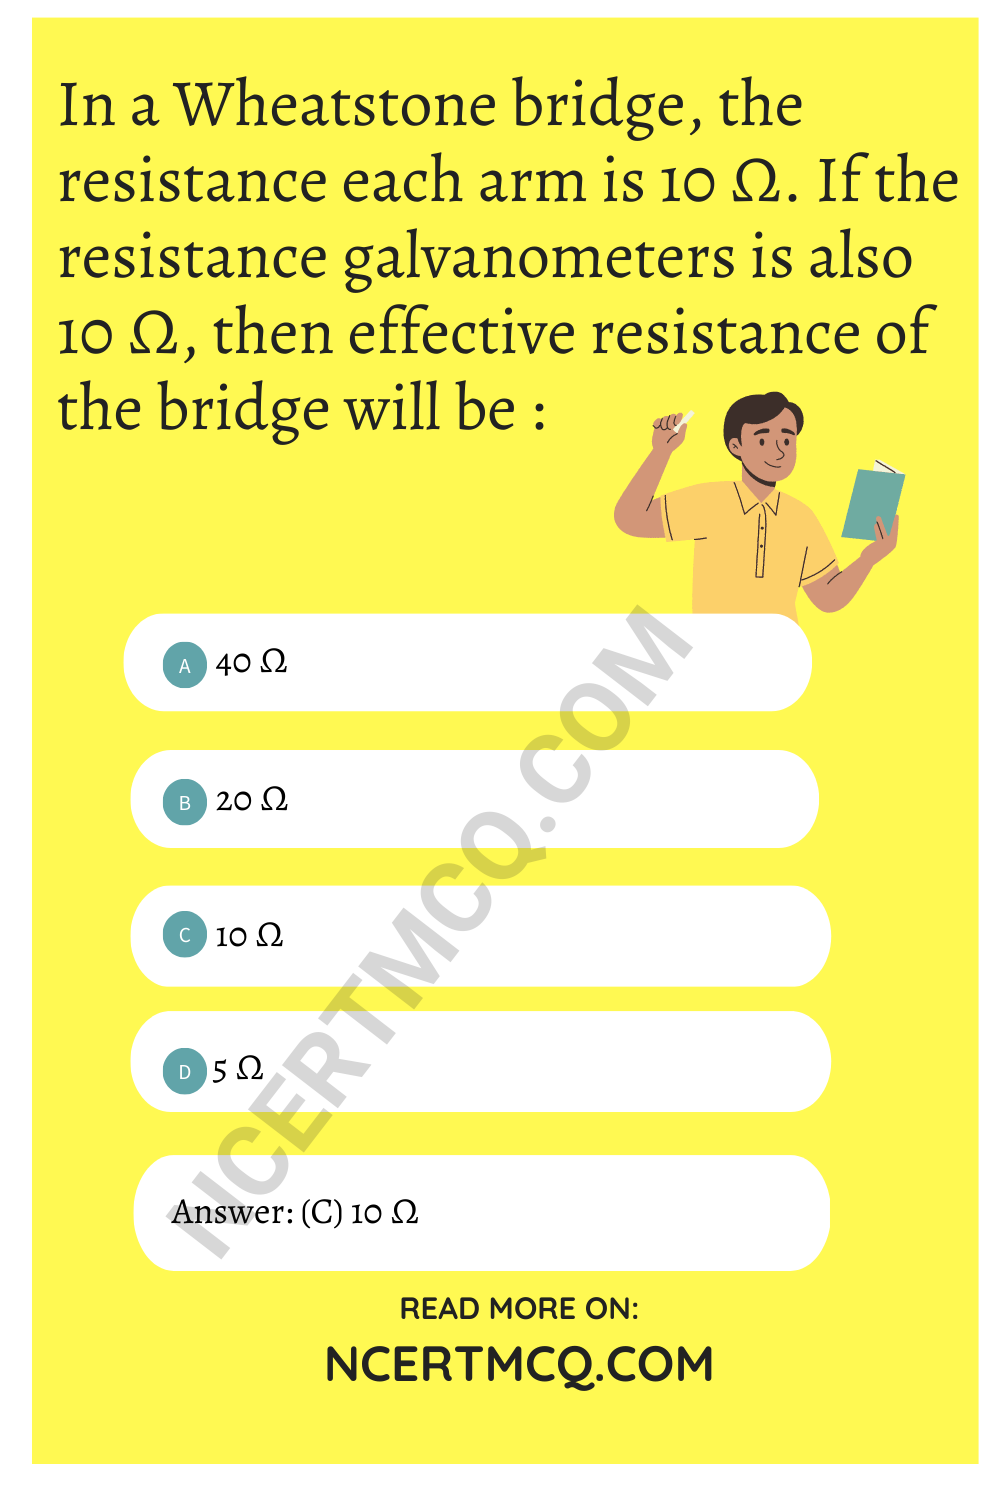 In a Wheatstone bridge, the resistance each arm is 10 Ω. If the resistance galvanometers is also 10 Ω, then effective resistance of the bridge will be :